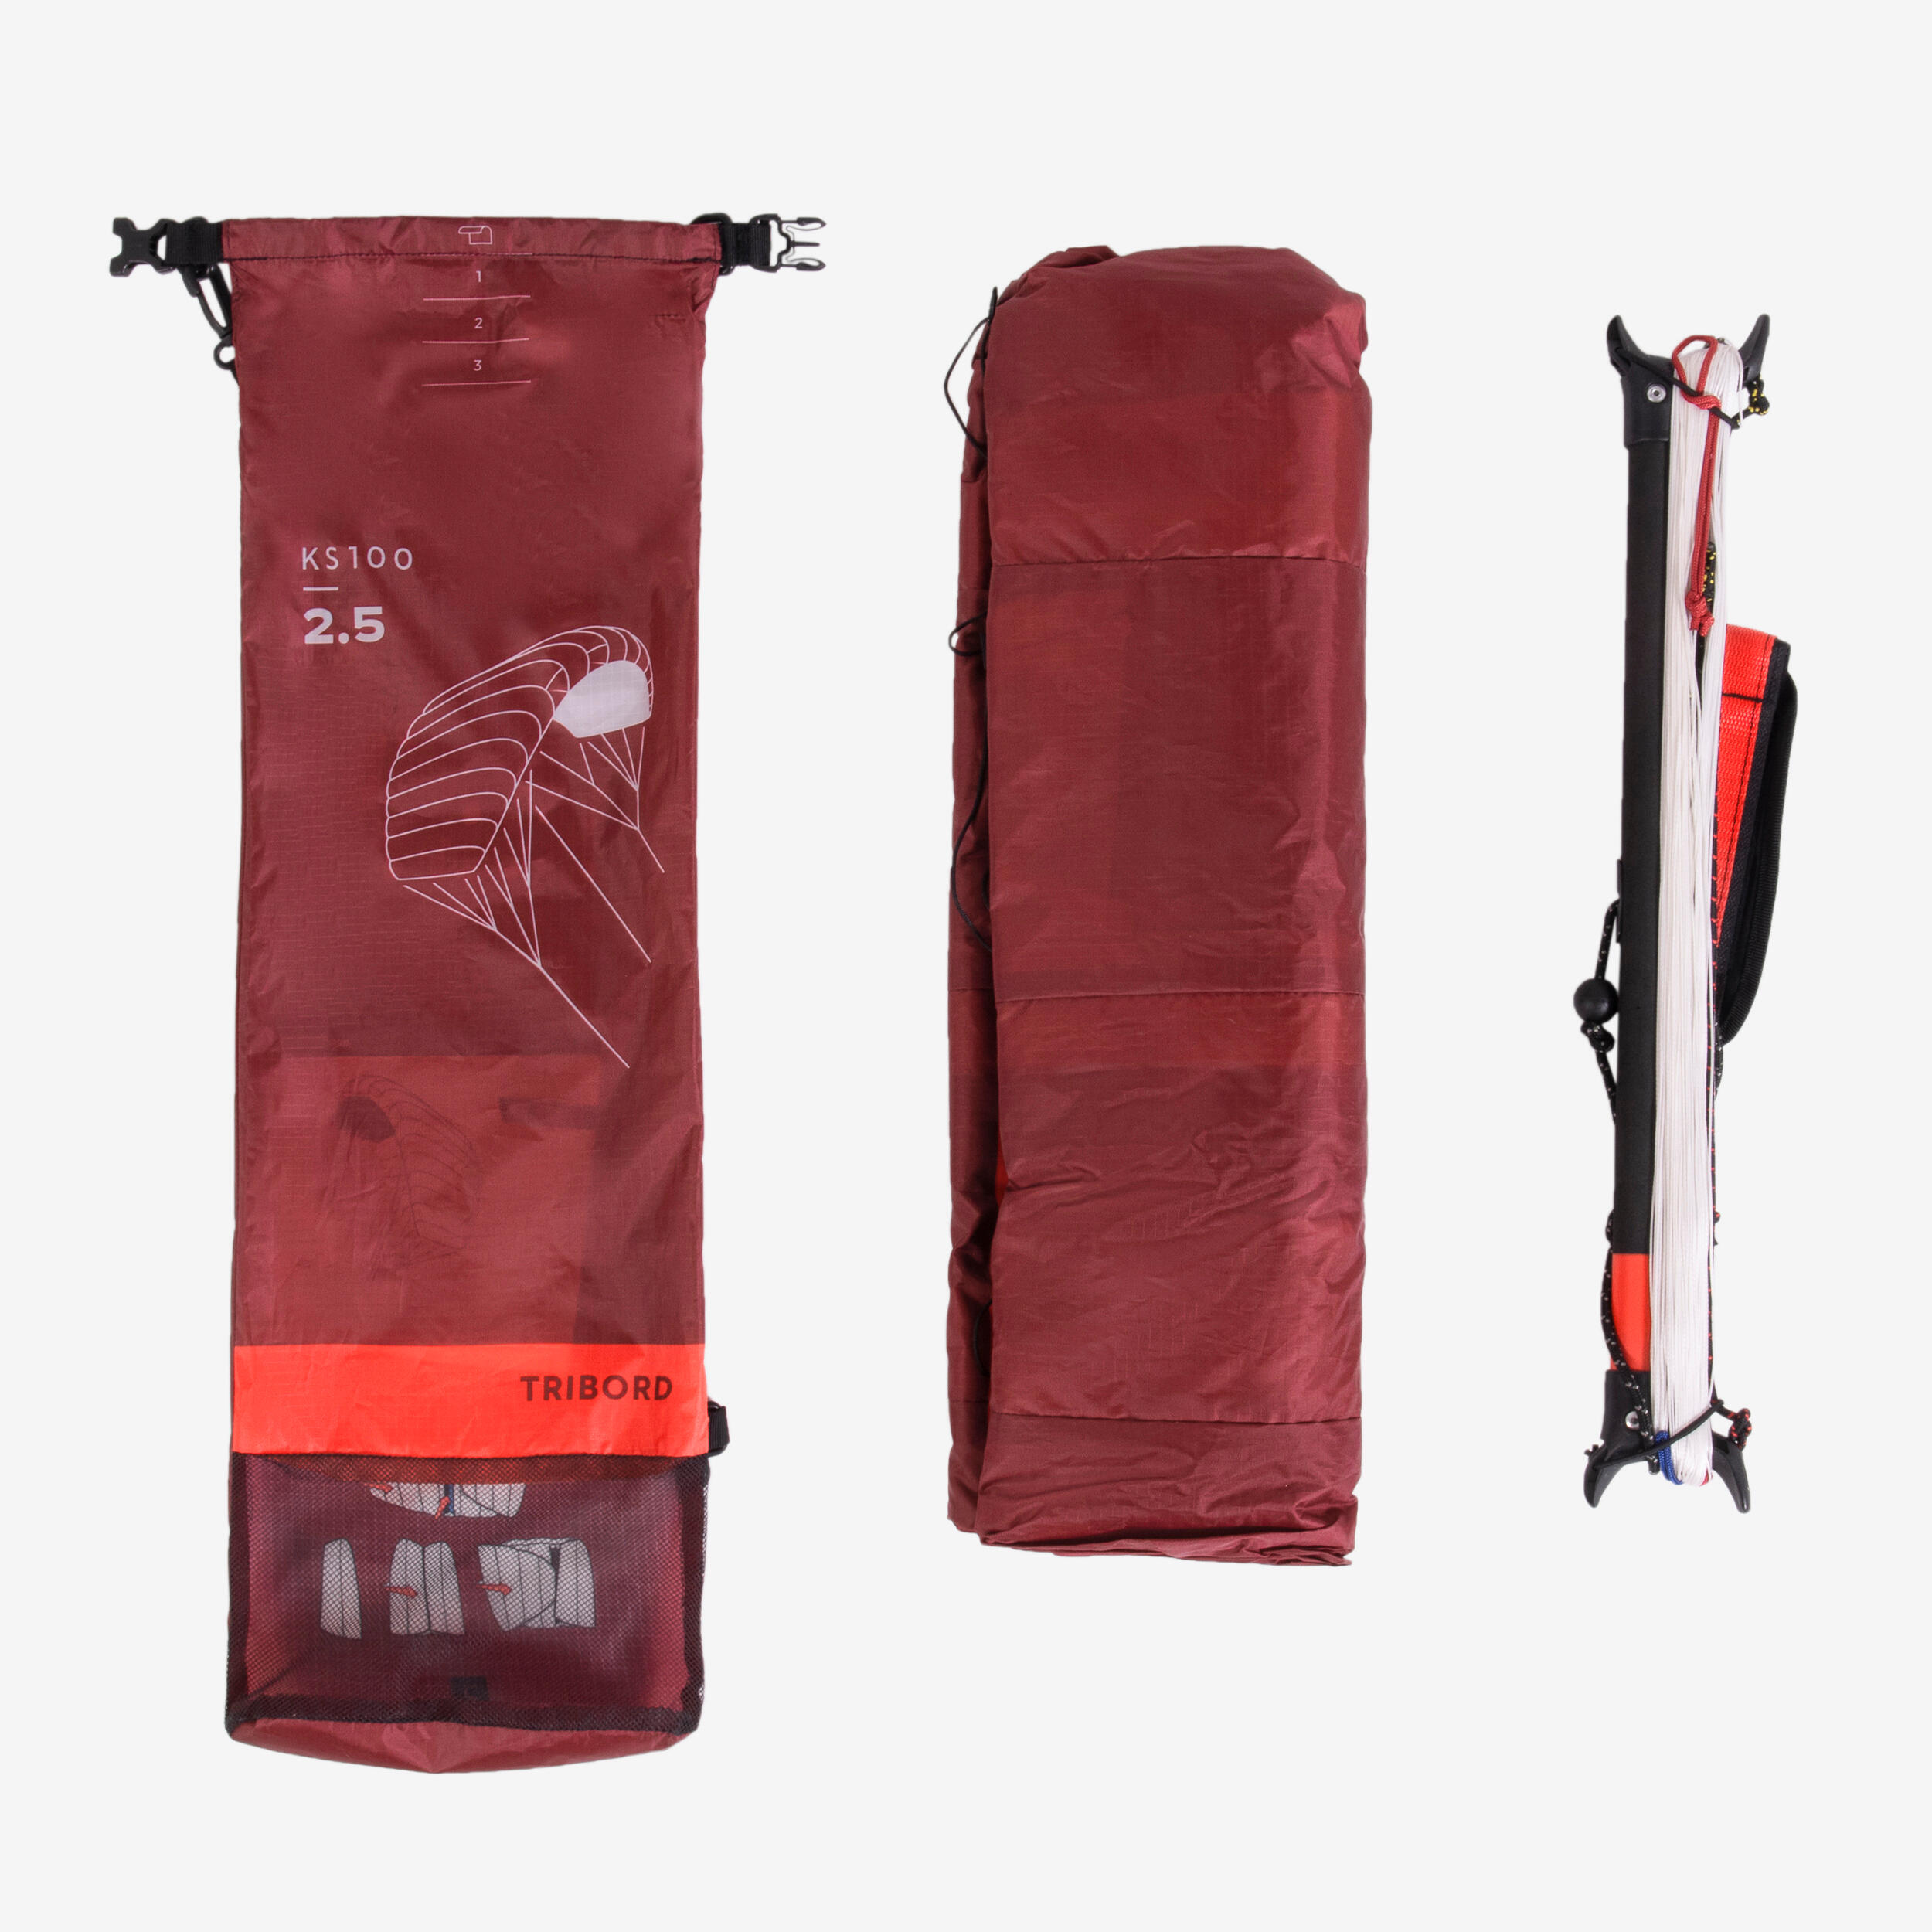 TRACTION KITE KS100 2.5 m2 red - with bar 7/7